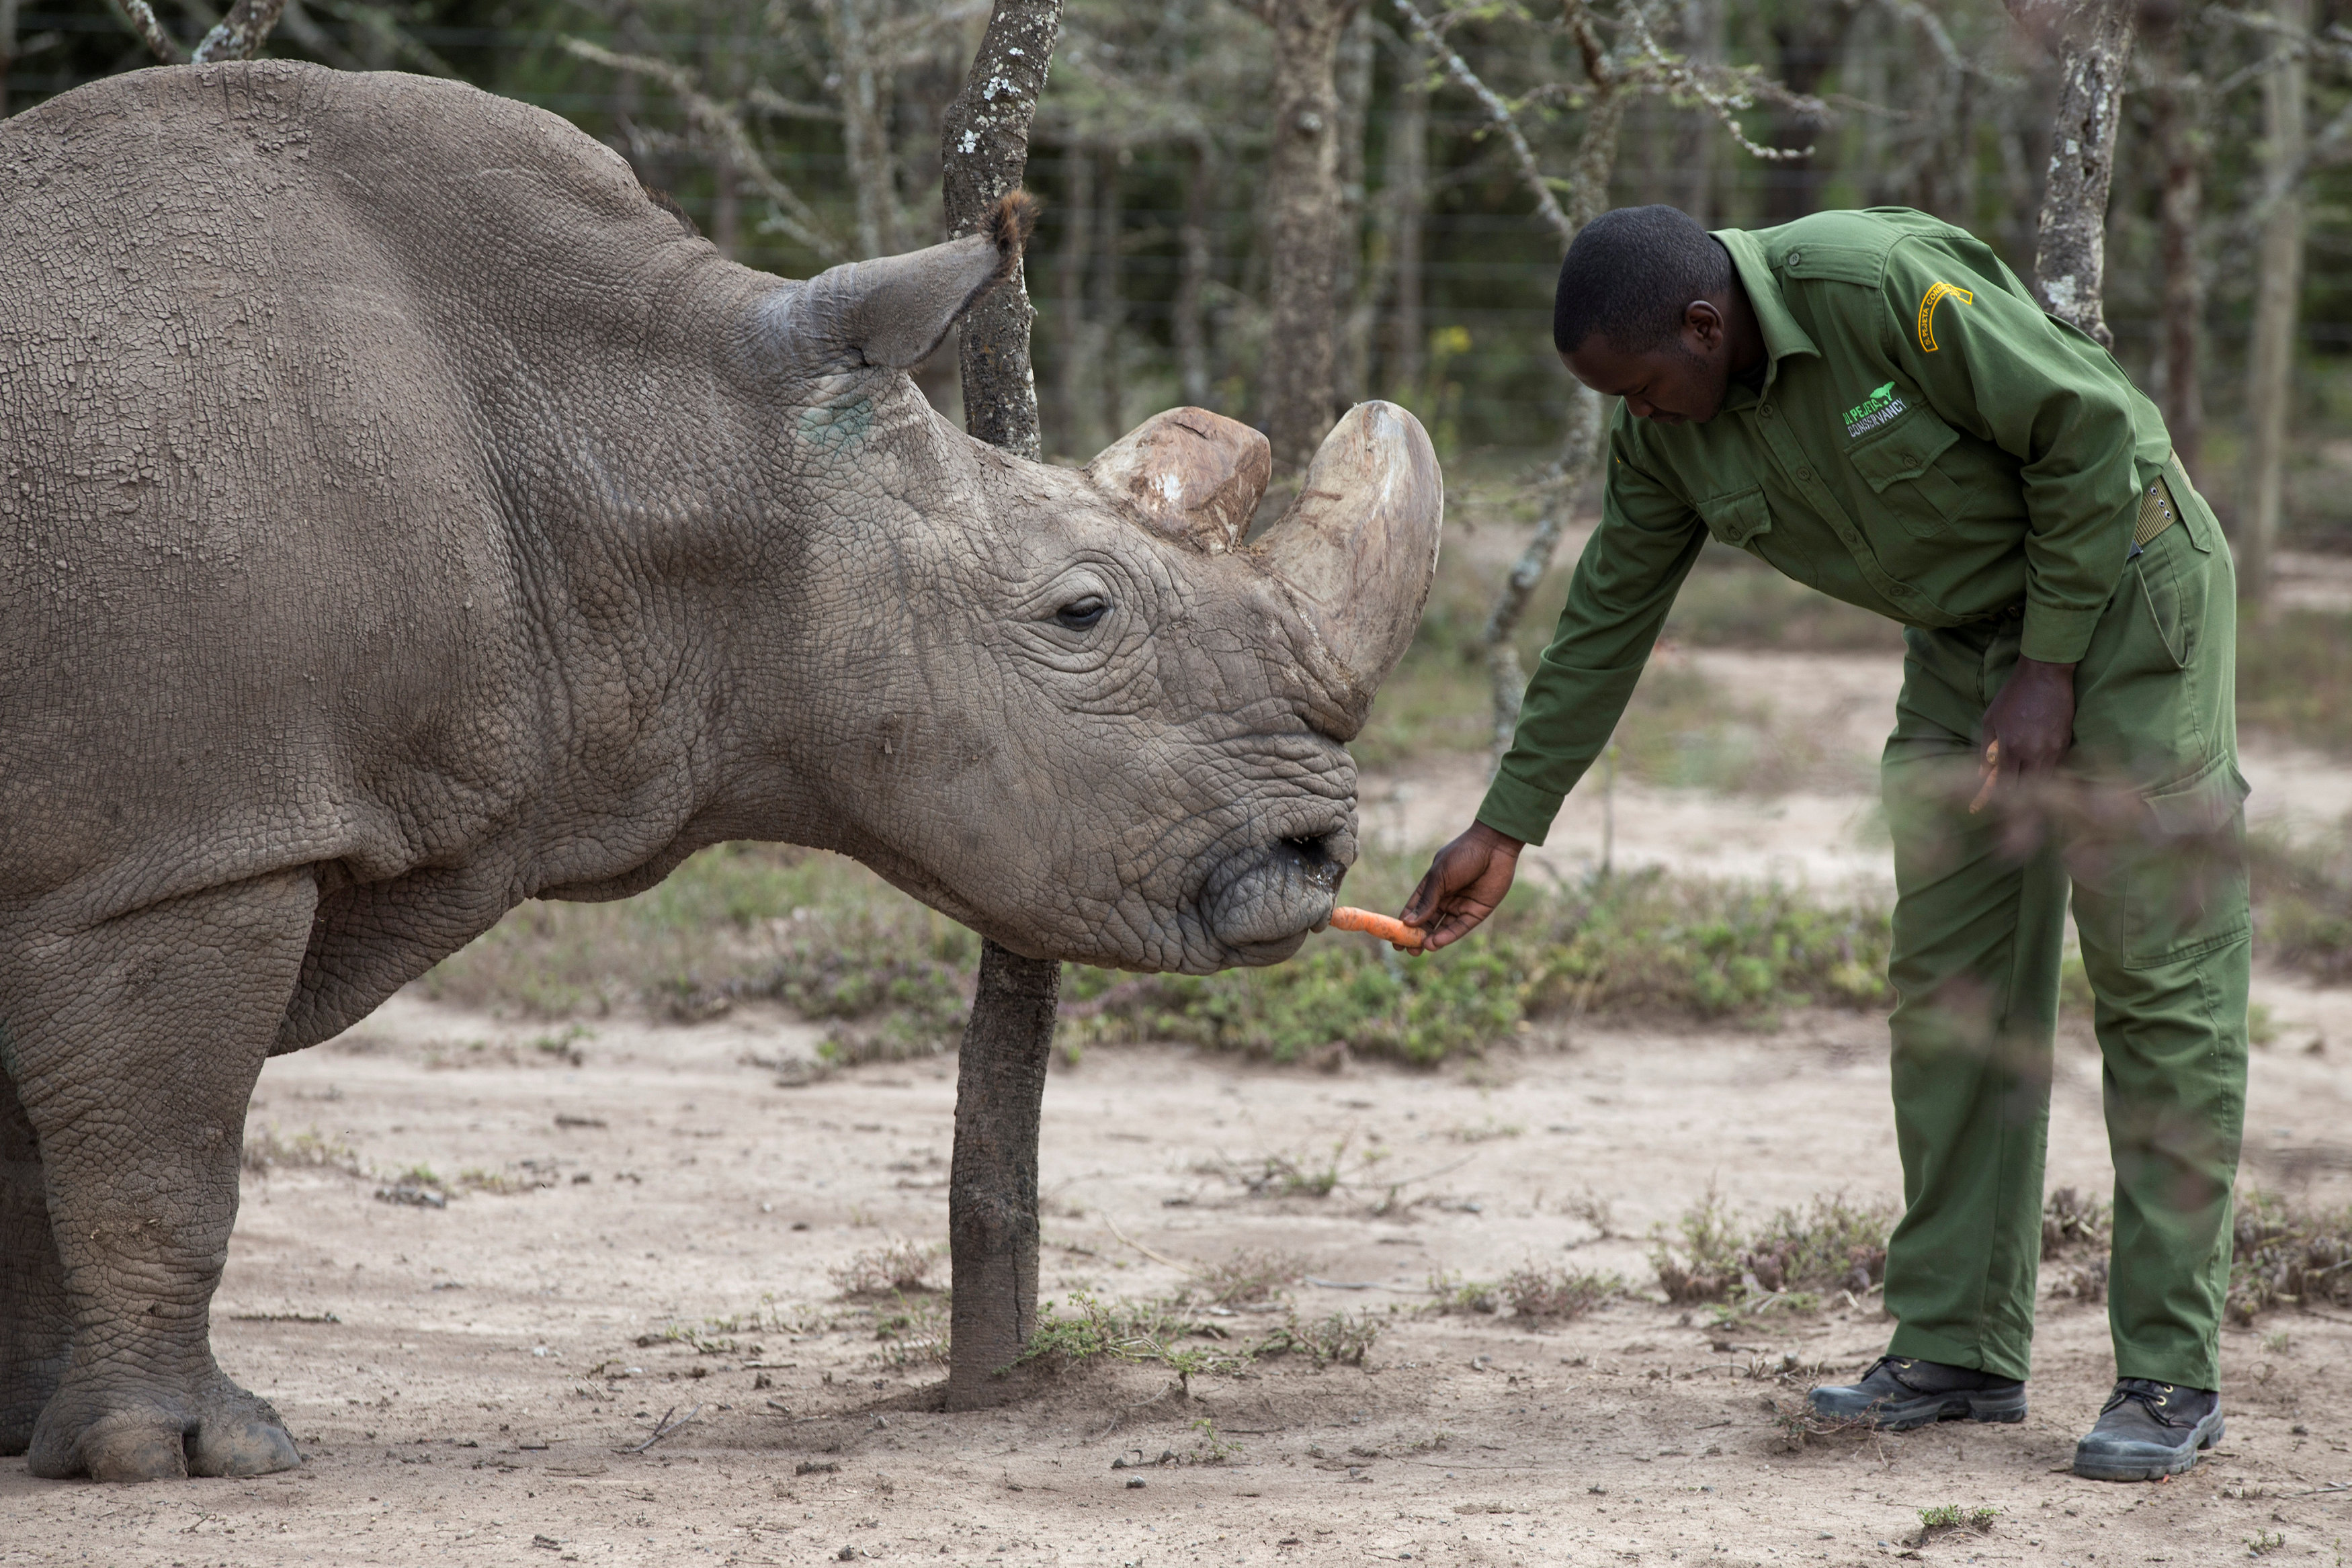 Sudan, the last surviving male northern white rhino, is fed by a warden at the Ol Pejeta Conservancy in Laikipia national park, Kenya May 3, 2017.